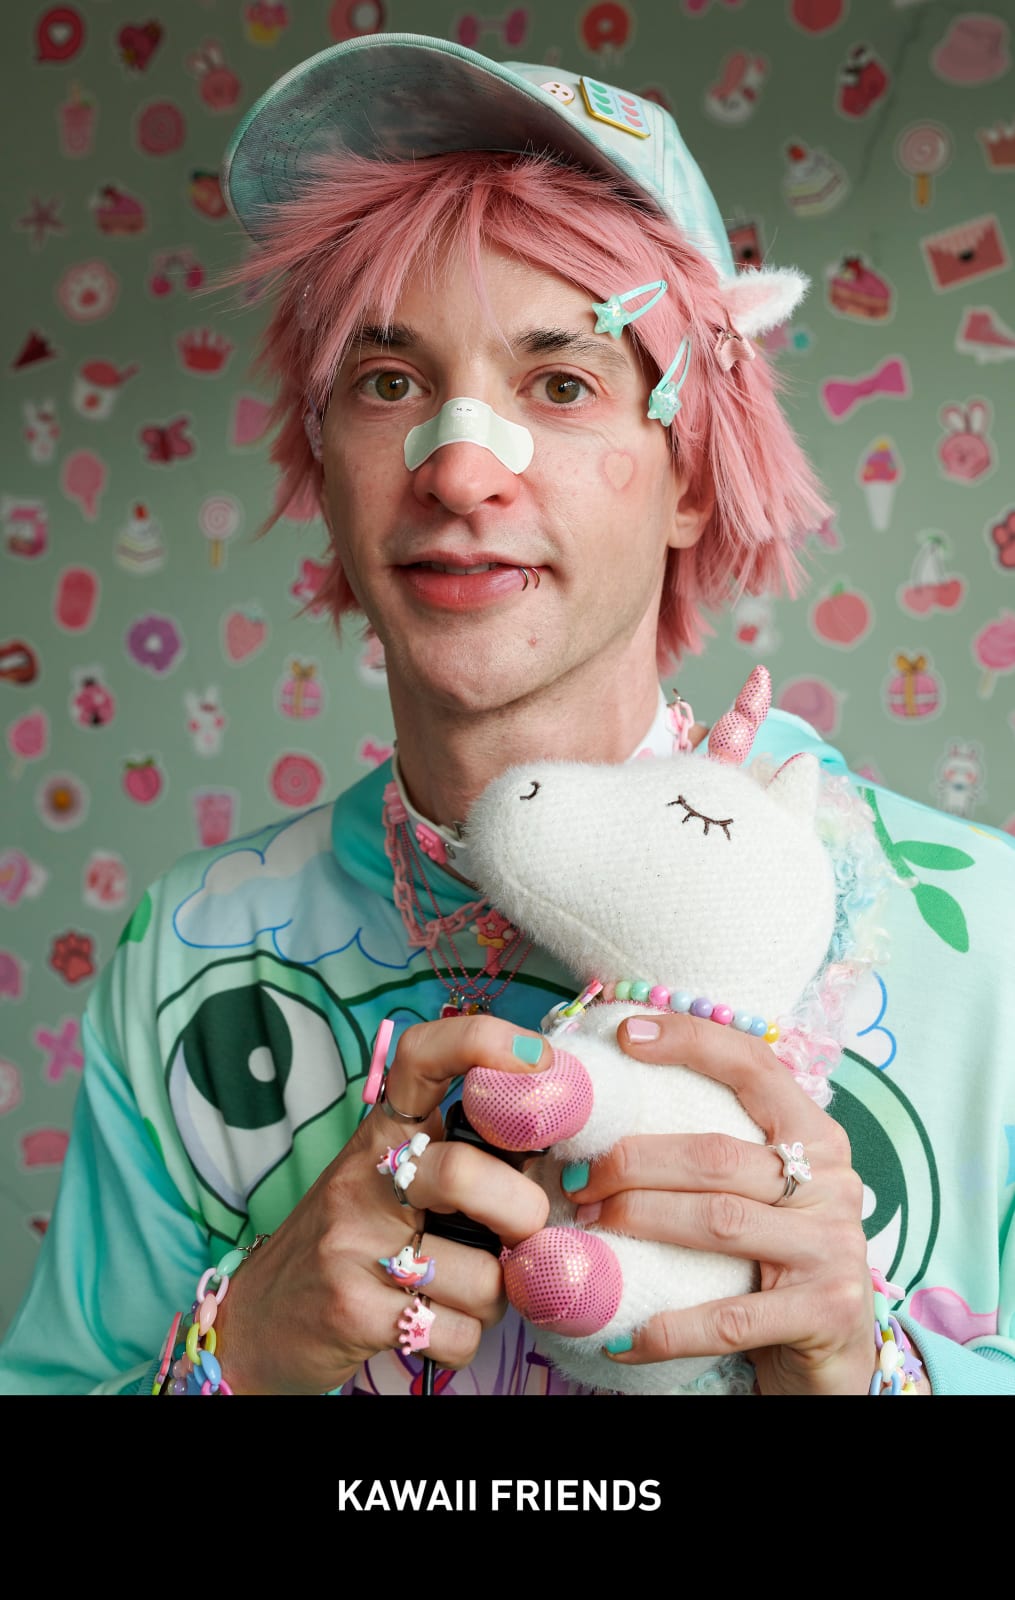 Mitchell Moreno, KAWAII FRIENDS from the series BODY COPY, 2021